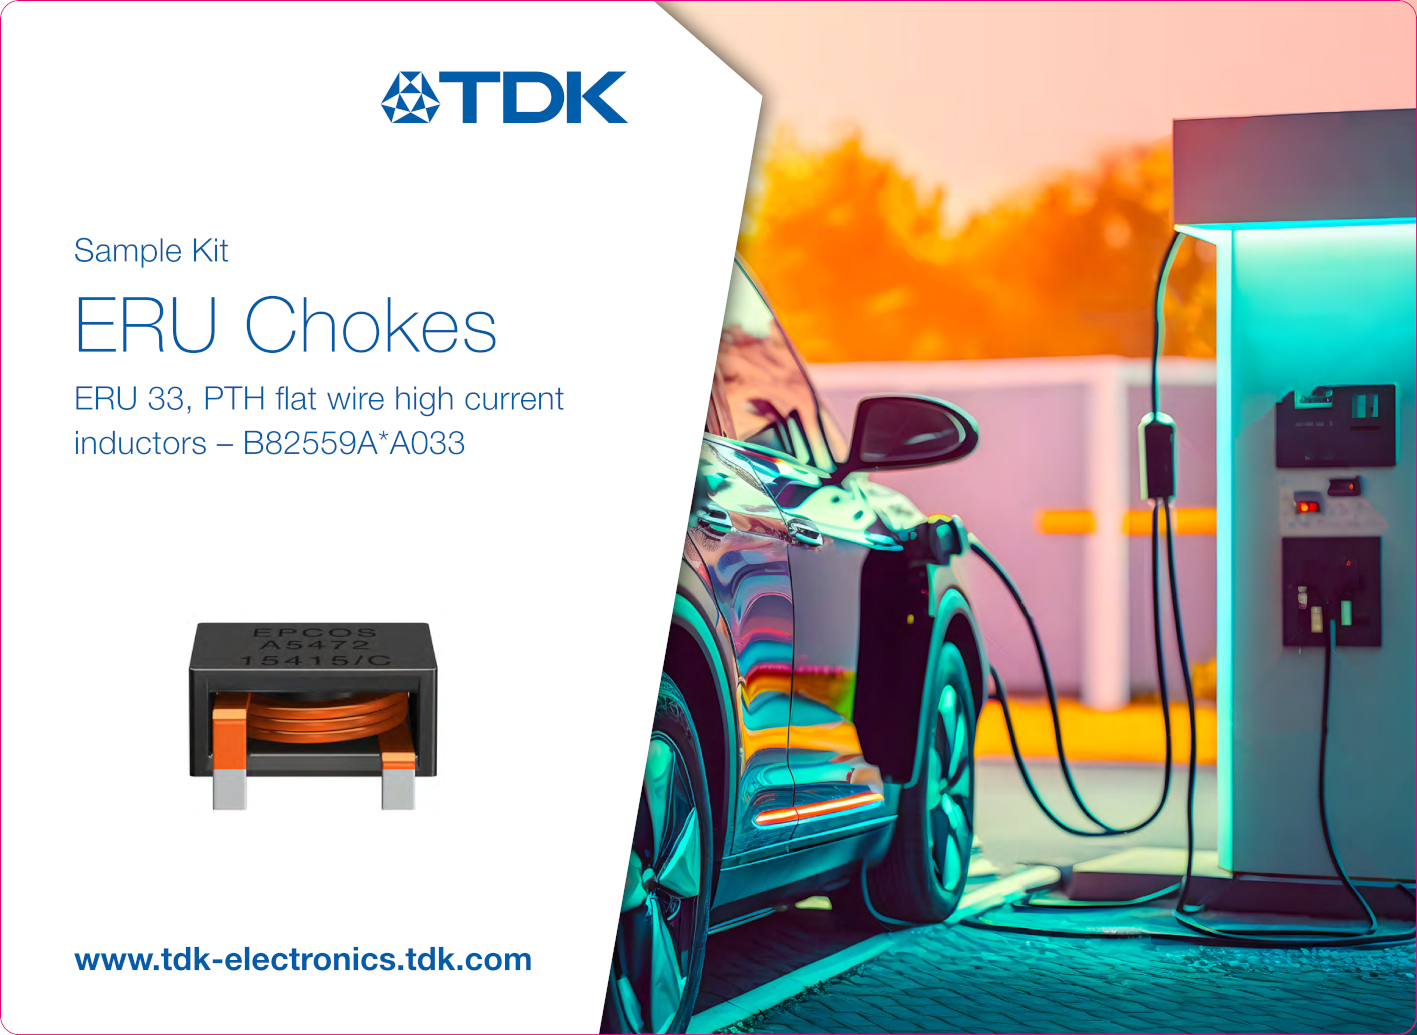 TDK Offers Sample Kit for the ERU 33 Series of Compact High-Current Chokes